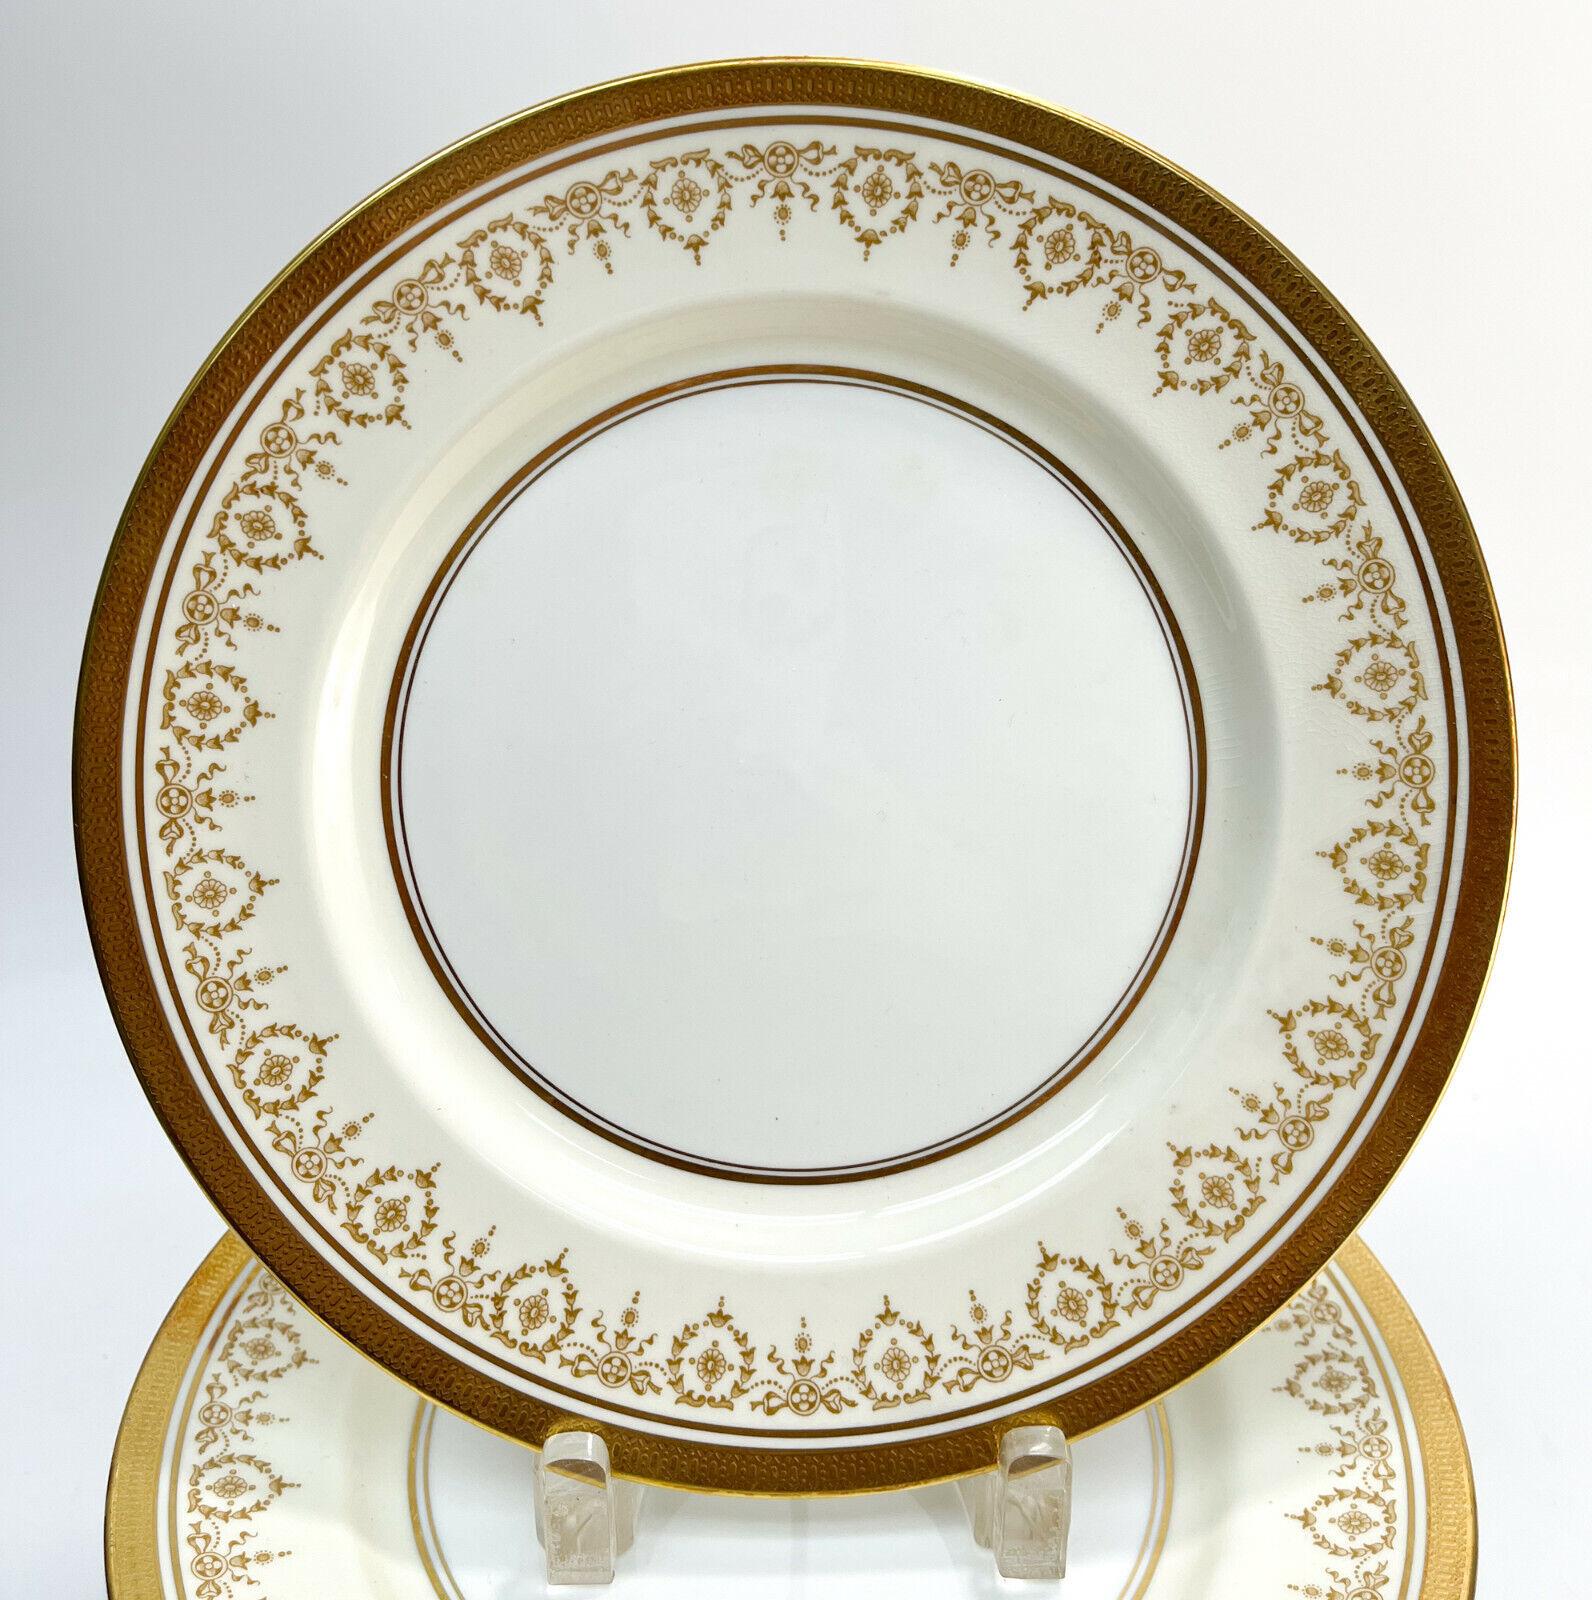 Set of 20 Aynsley England Porcelain Dinner Plates in Gold Dowery, circa 1960

Gold encrusted band to the rim. Aynsley England mark to the underside base.

Additional Information:
Material: Porcelain 
Year Manufactured: 1960
Brand: Aynsley